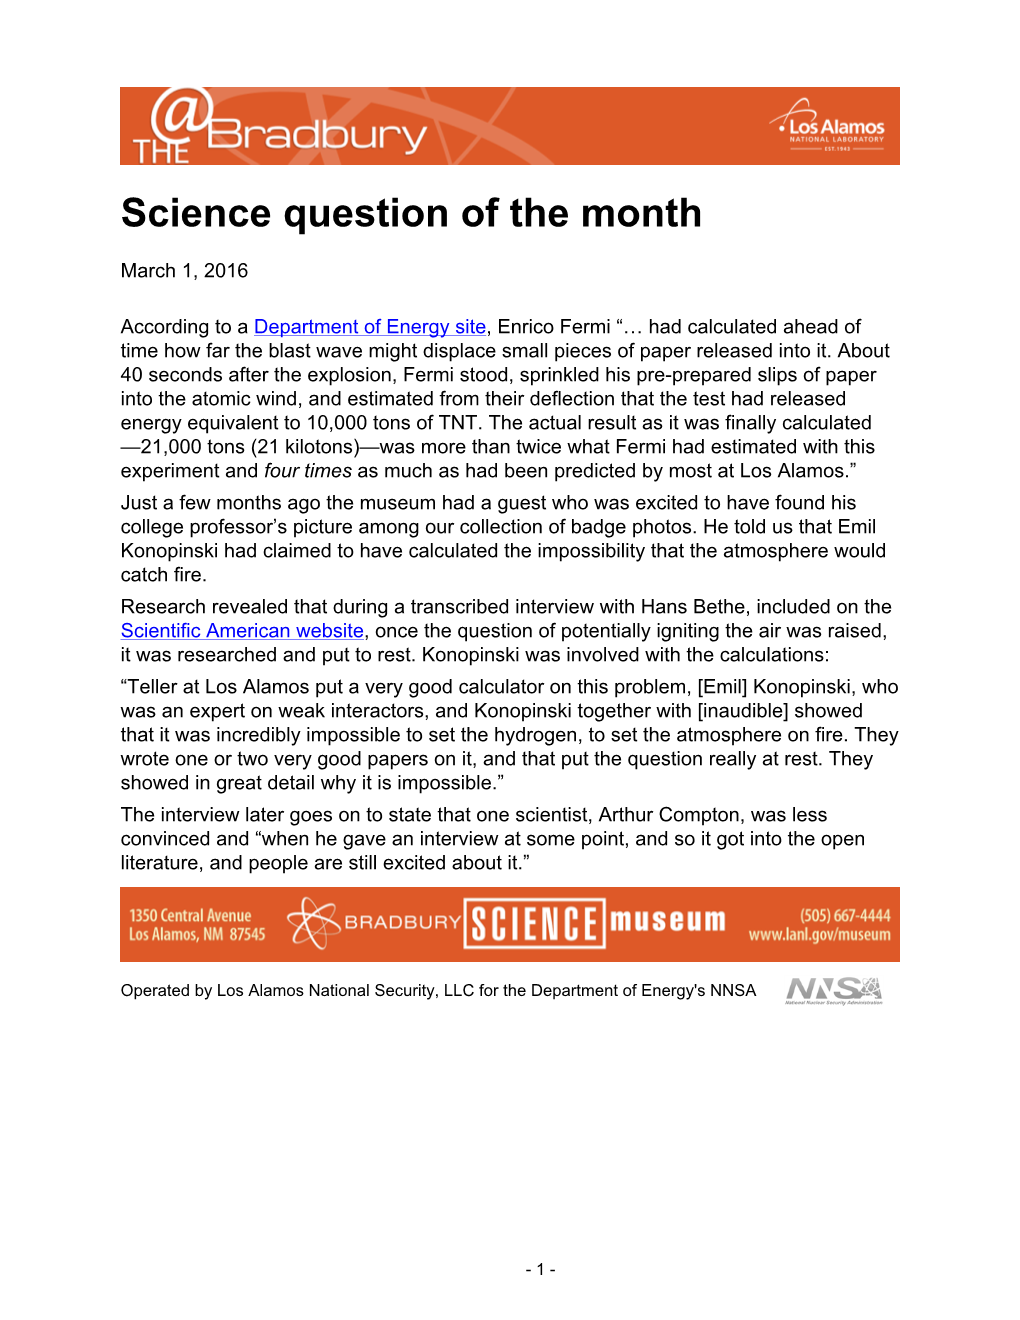 Science Question of the Month